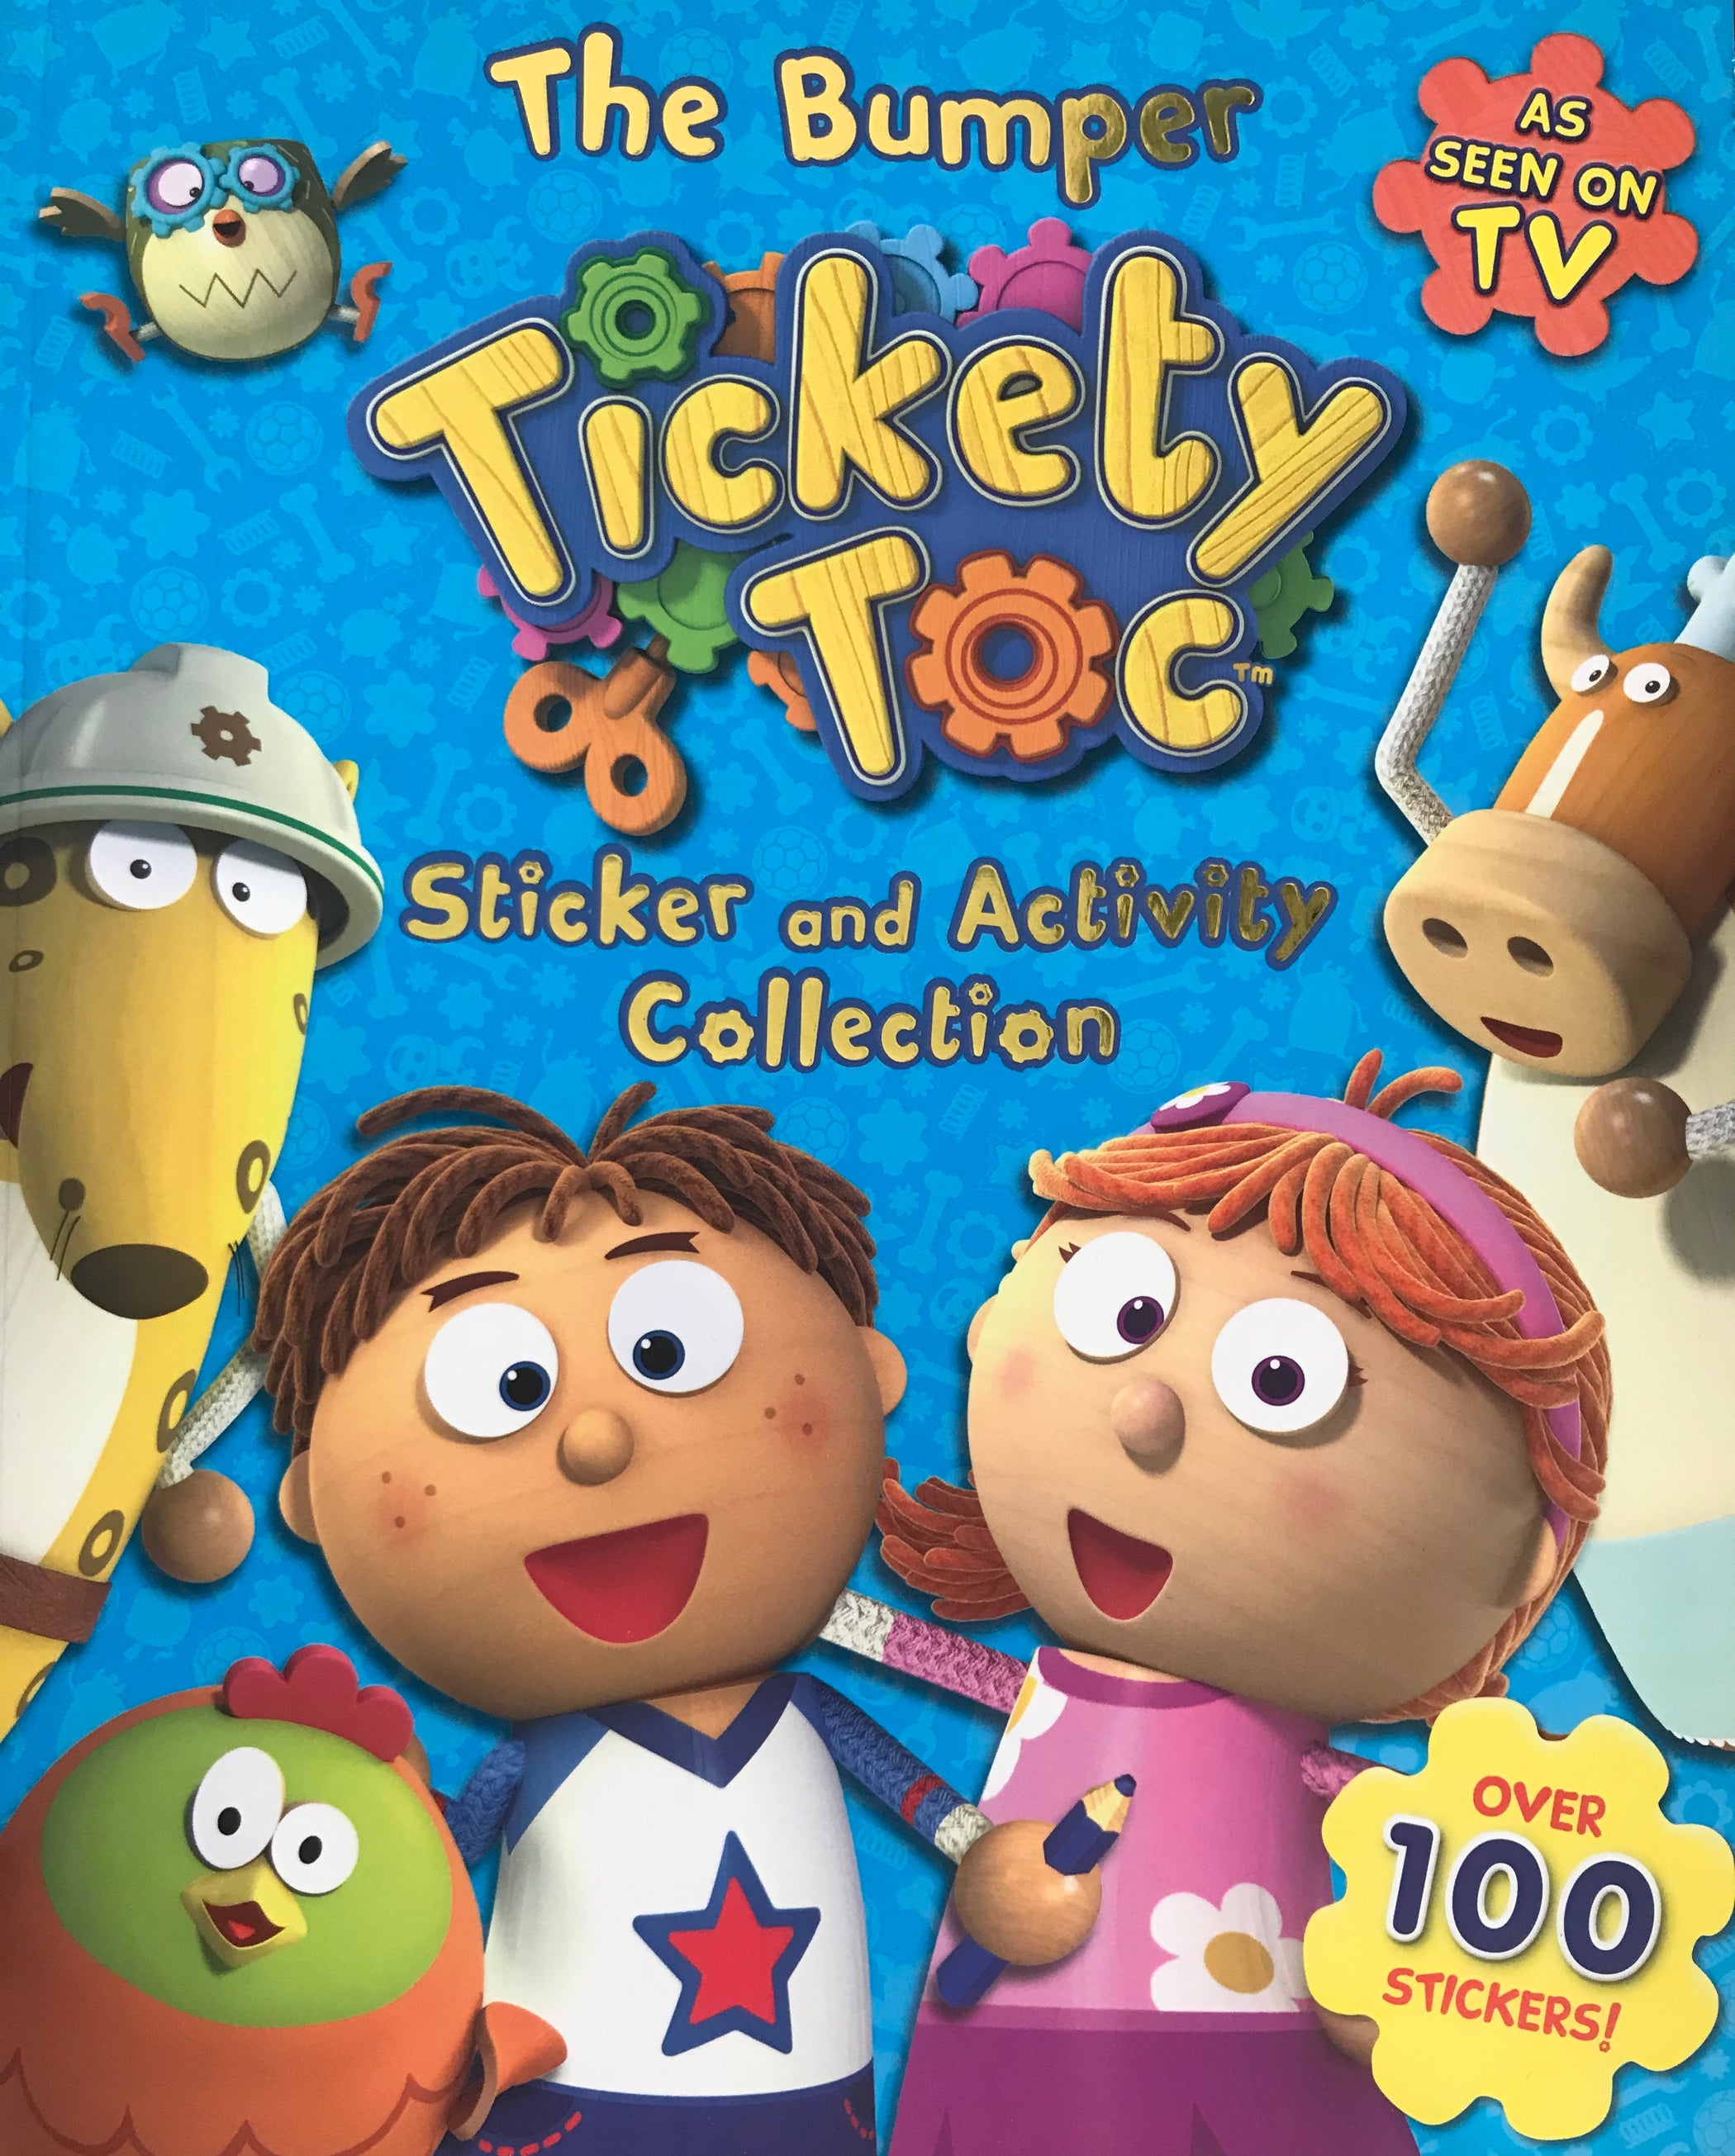 Bumper Tickety Toc: Sticker and Activity Collection, The – DiskontoBooks